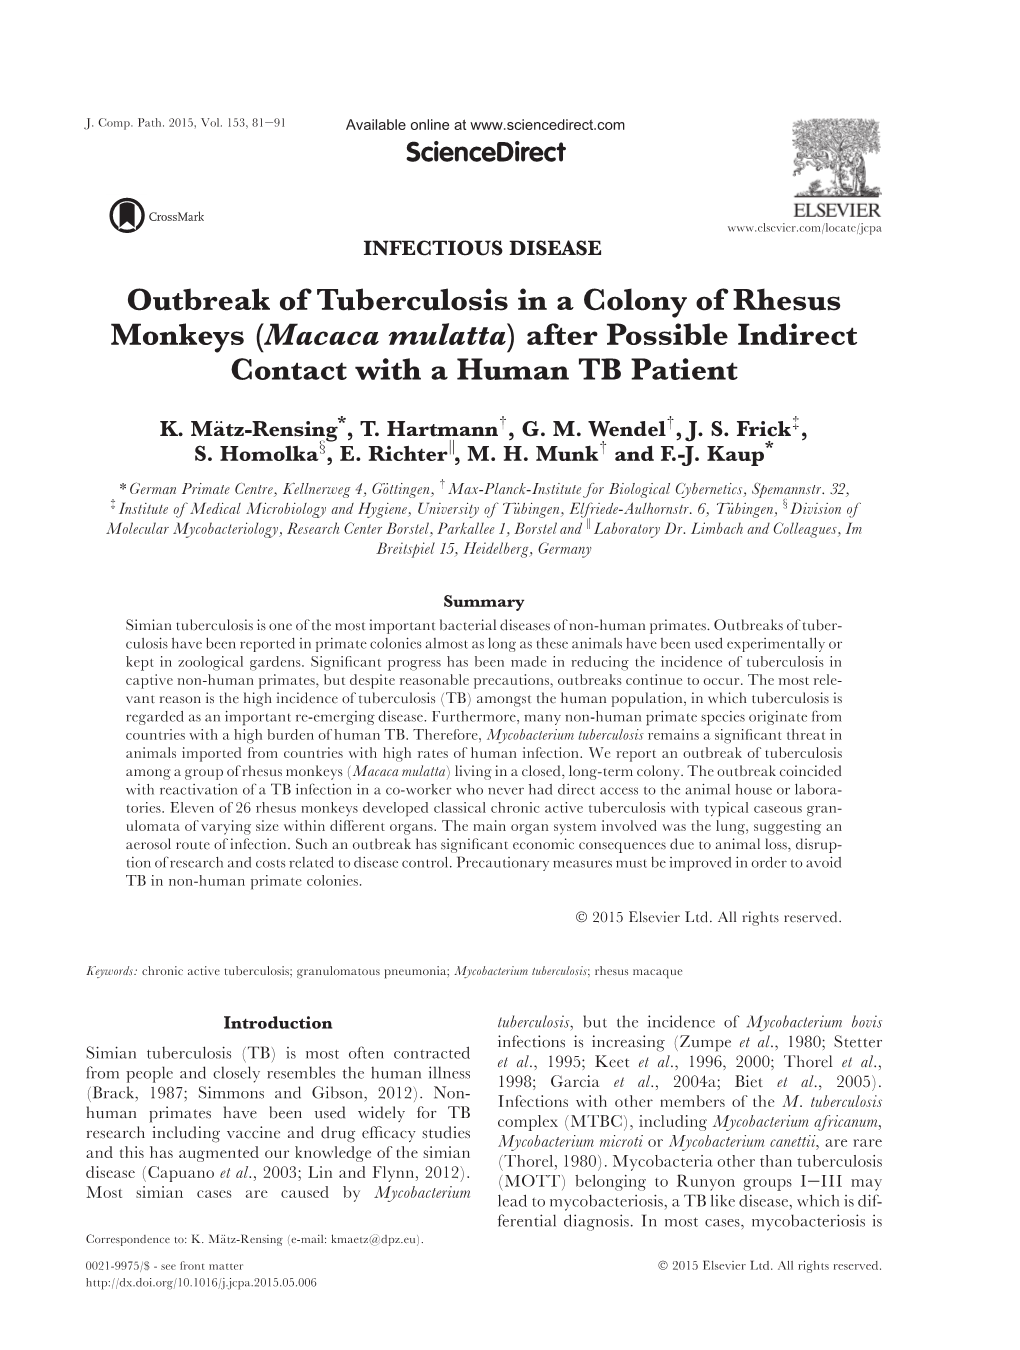 Outbreak of Tuberculosis in a Colony of Rhesus Monkeys (Macaca Mulatta) After Possible Indirect Contact with a Human TB Patient